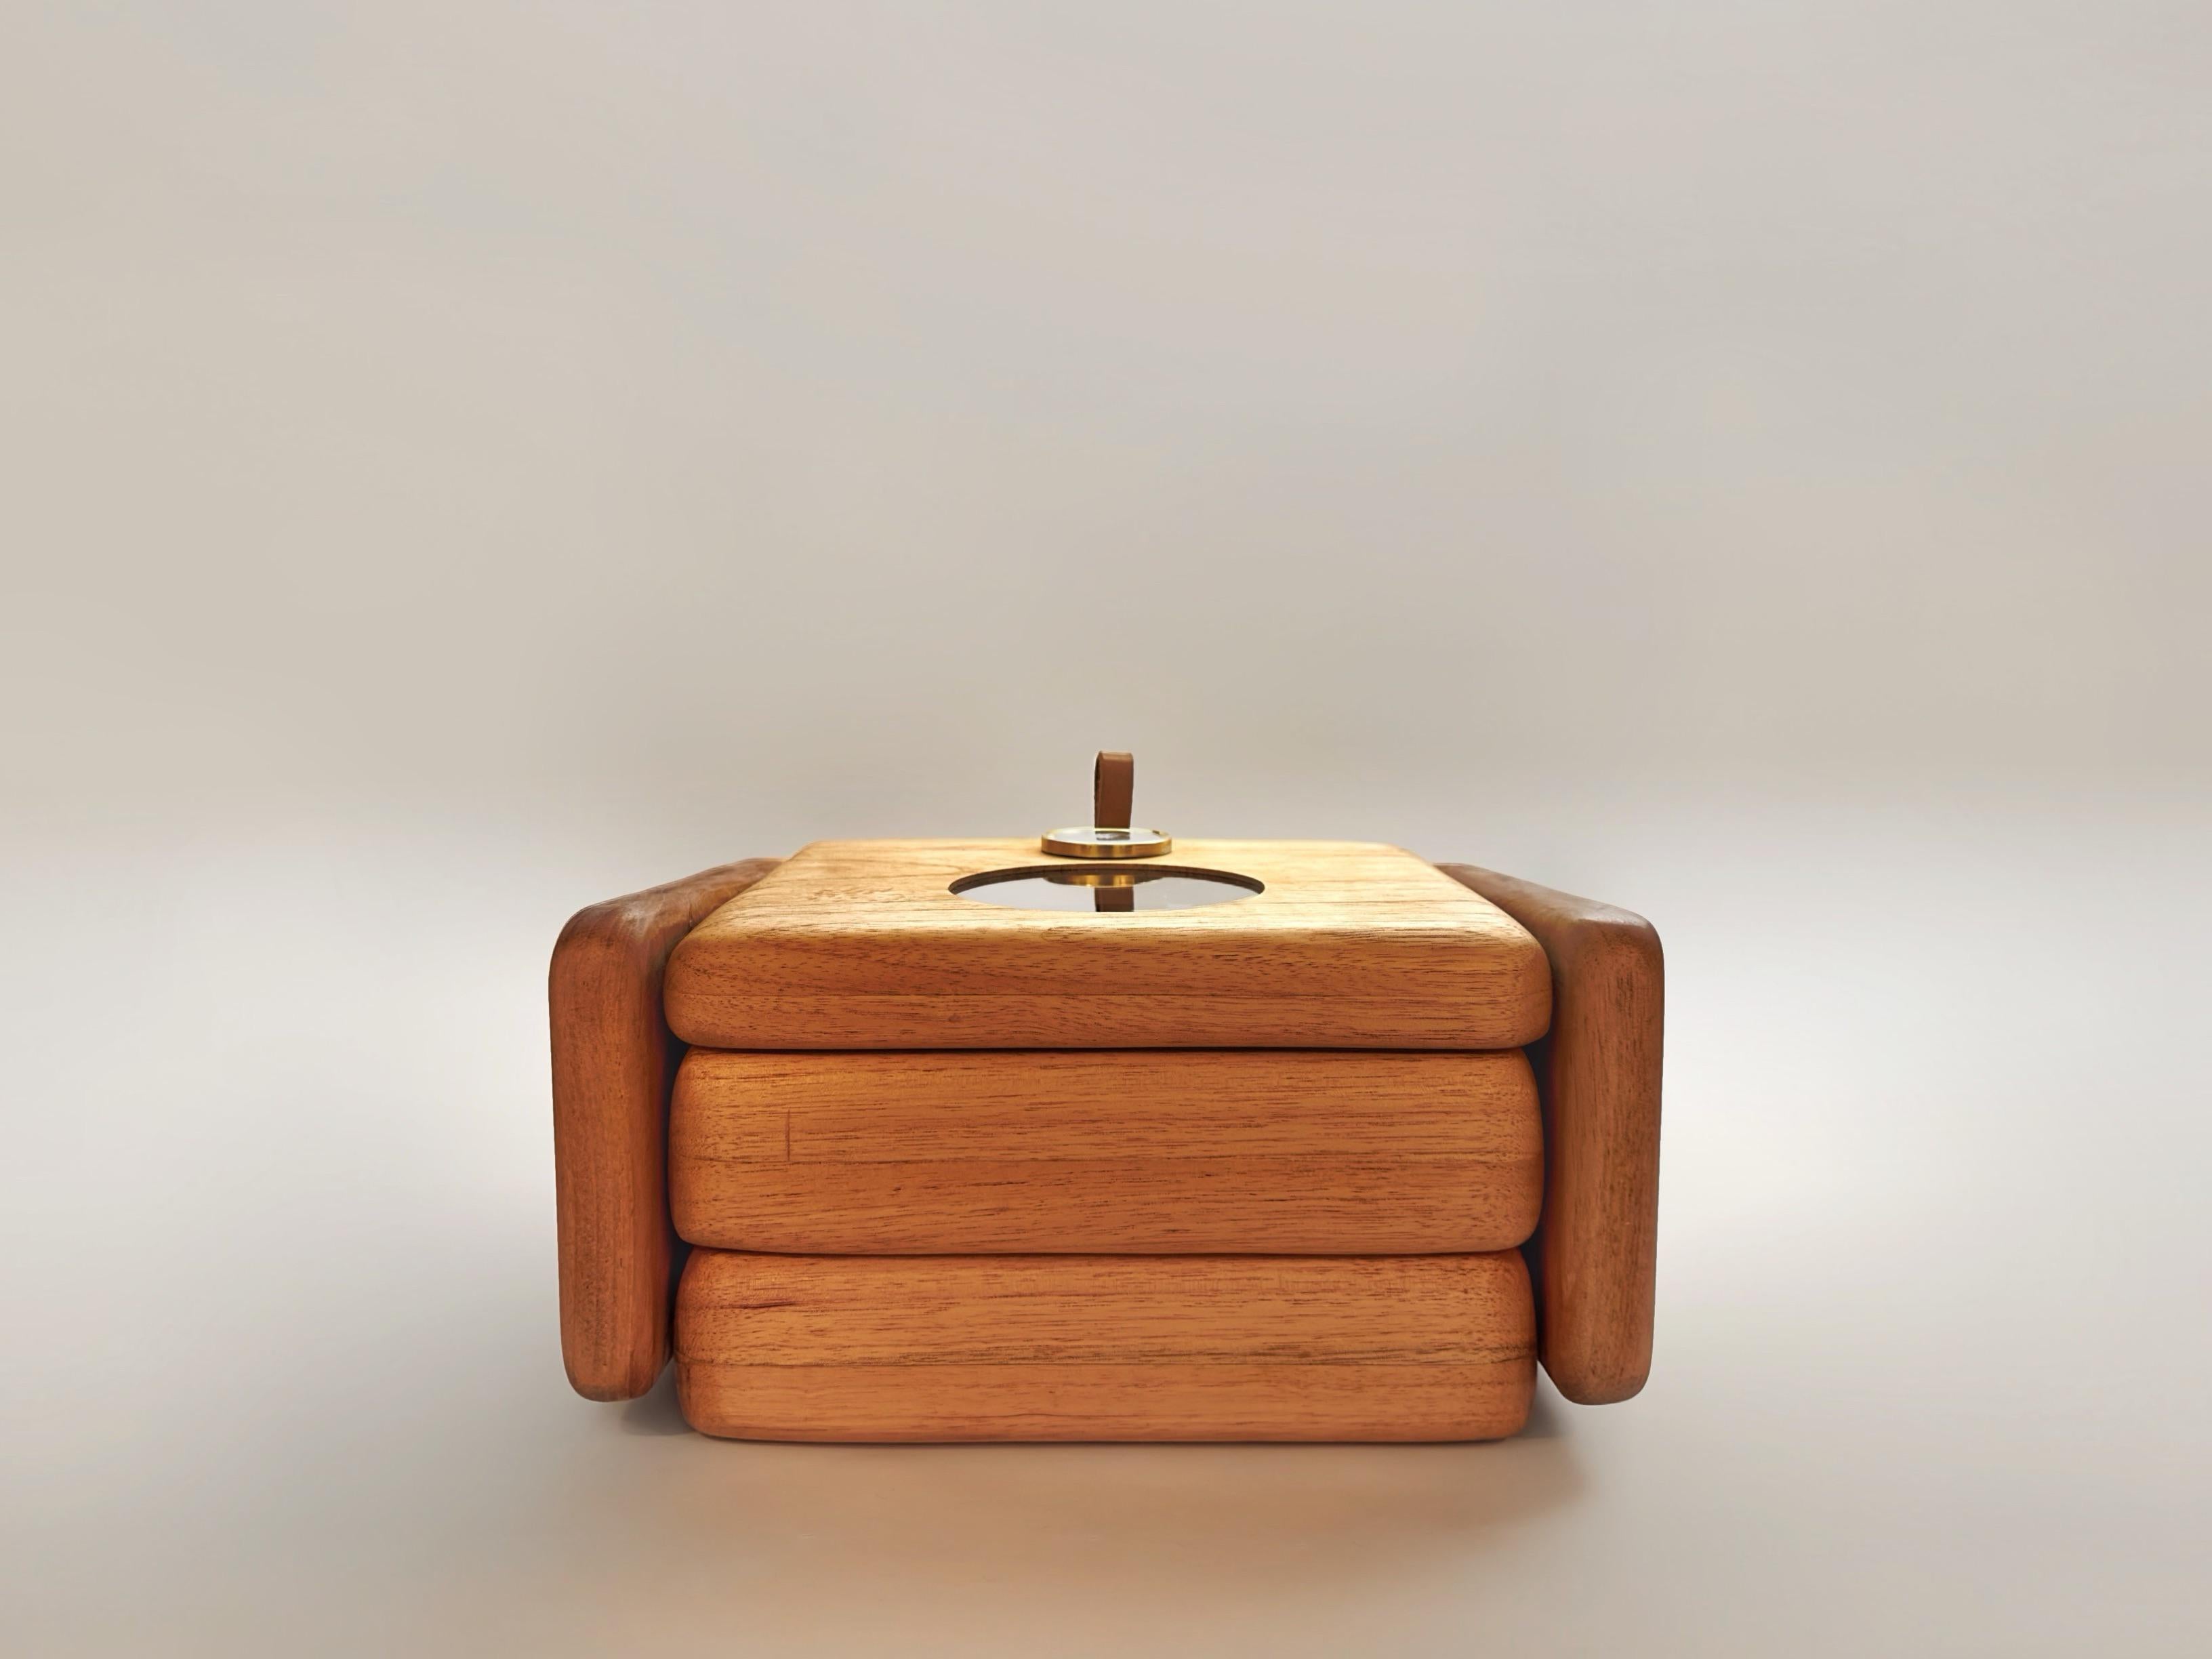 The cigar box conceived by Valter Costa Lima is an eloquent testament to the union between tradition and innovation. Made of cedarwood, every stroke of this piece is an ode to the Brazilian essence. The contours pay homage to the rich heritage of